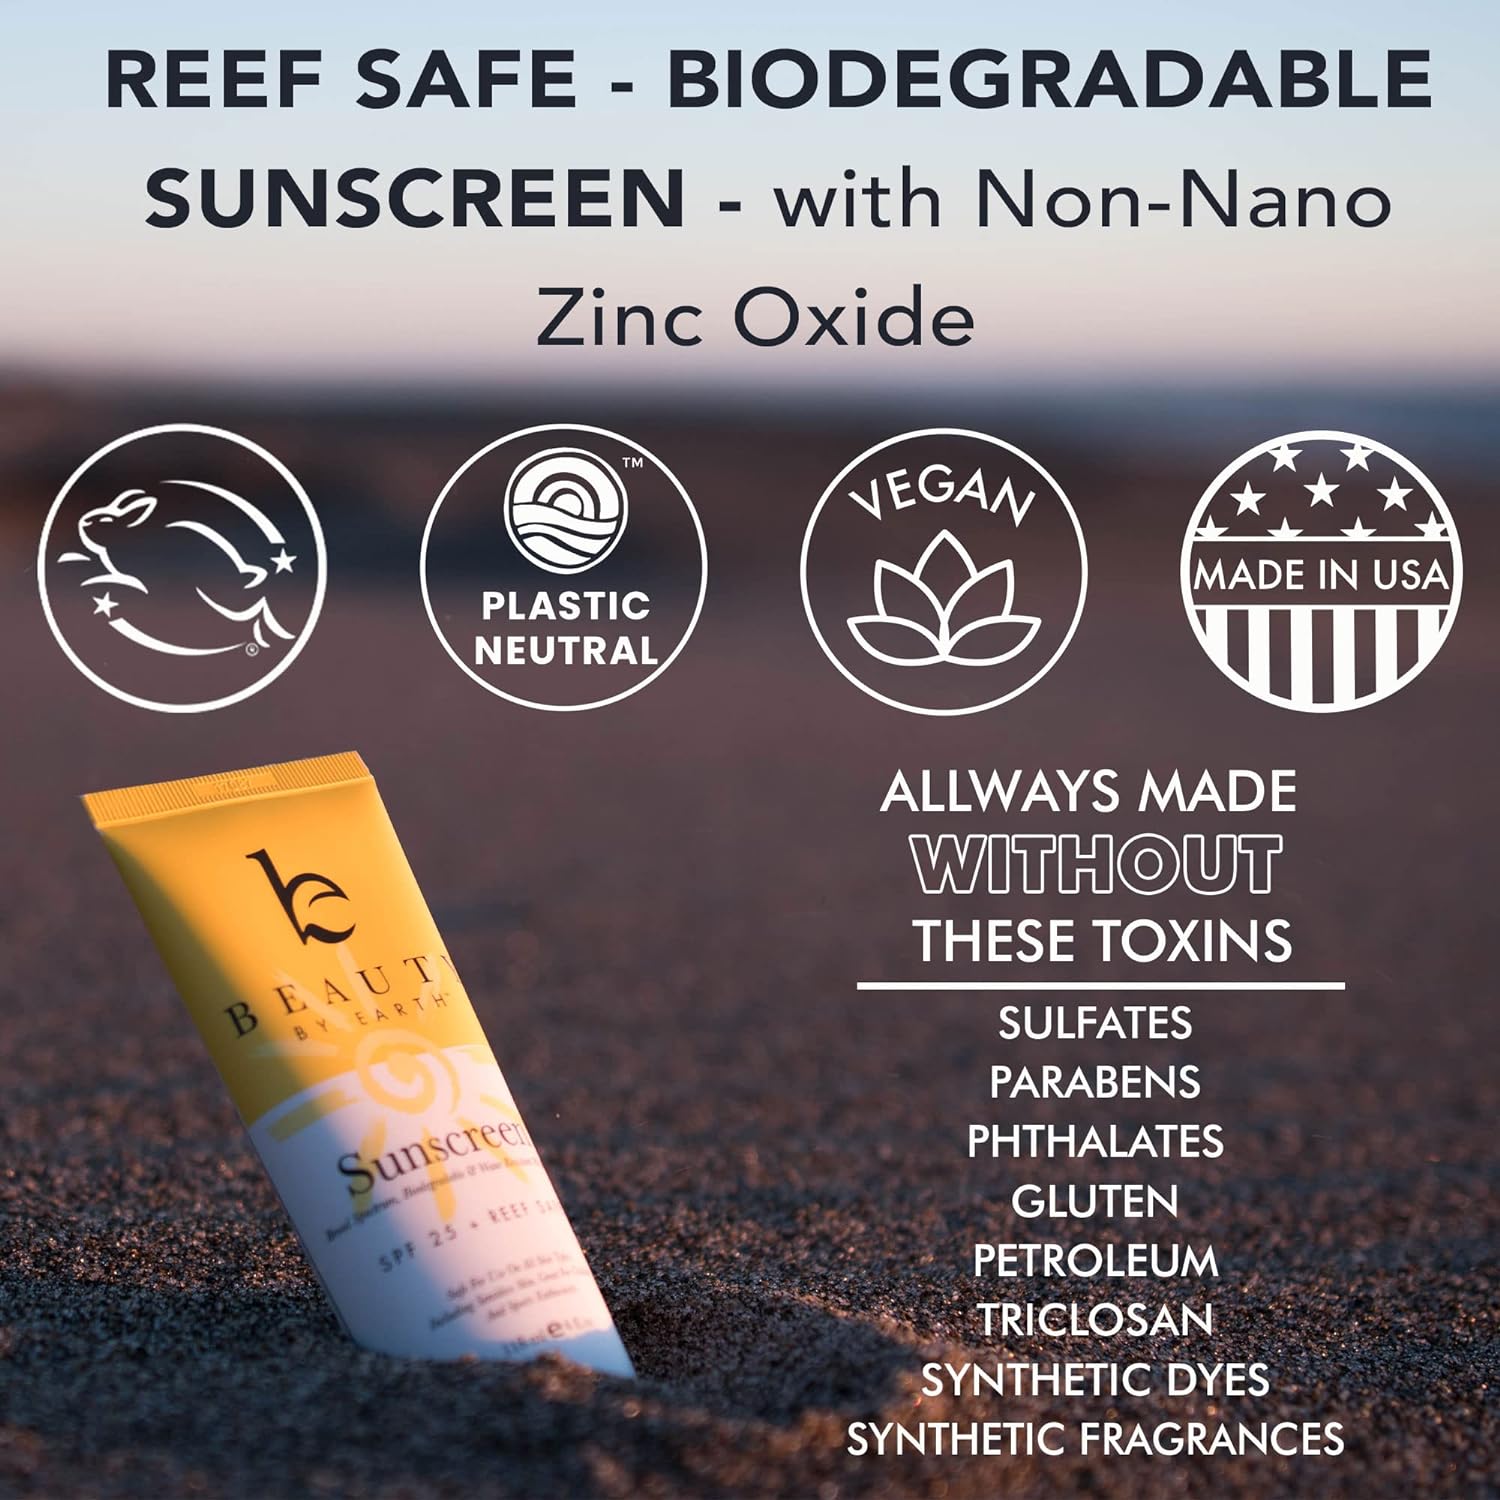 Face Sunscreen SPF 20 - Mineral Sunscreen Face, Reef Friendly Sunscreen With Natural & Organic Ingredients, Biodegradable Sunscreen, Zinc Oxide Sunscreen for Daily Use, Facial Sunscreen Travel Size : Beauty & Personal Care